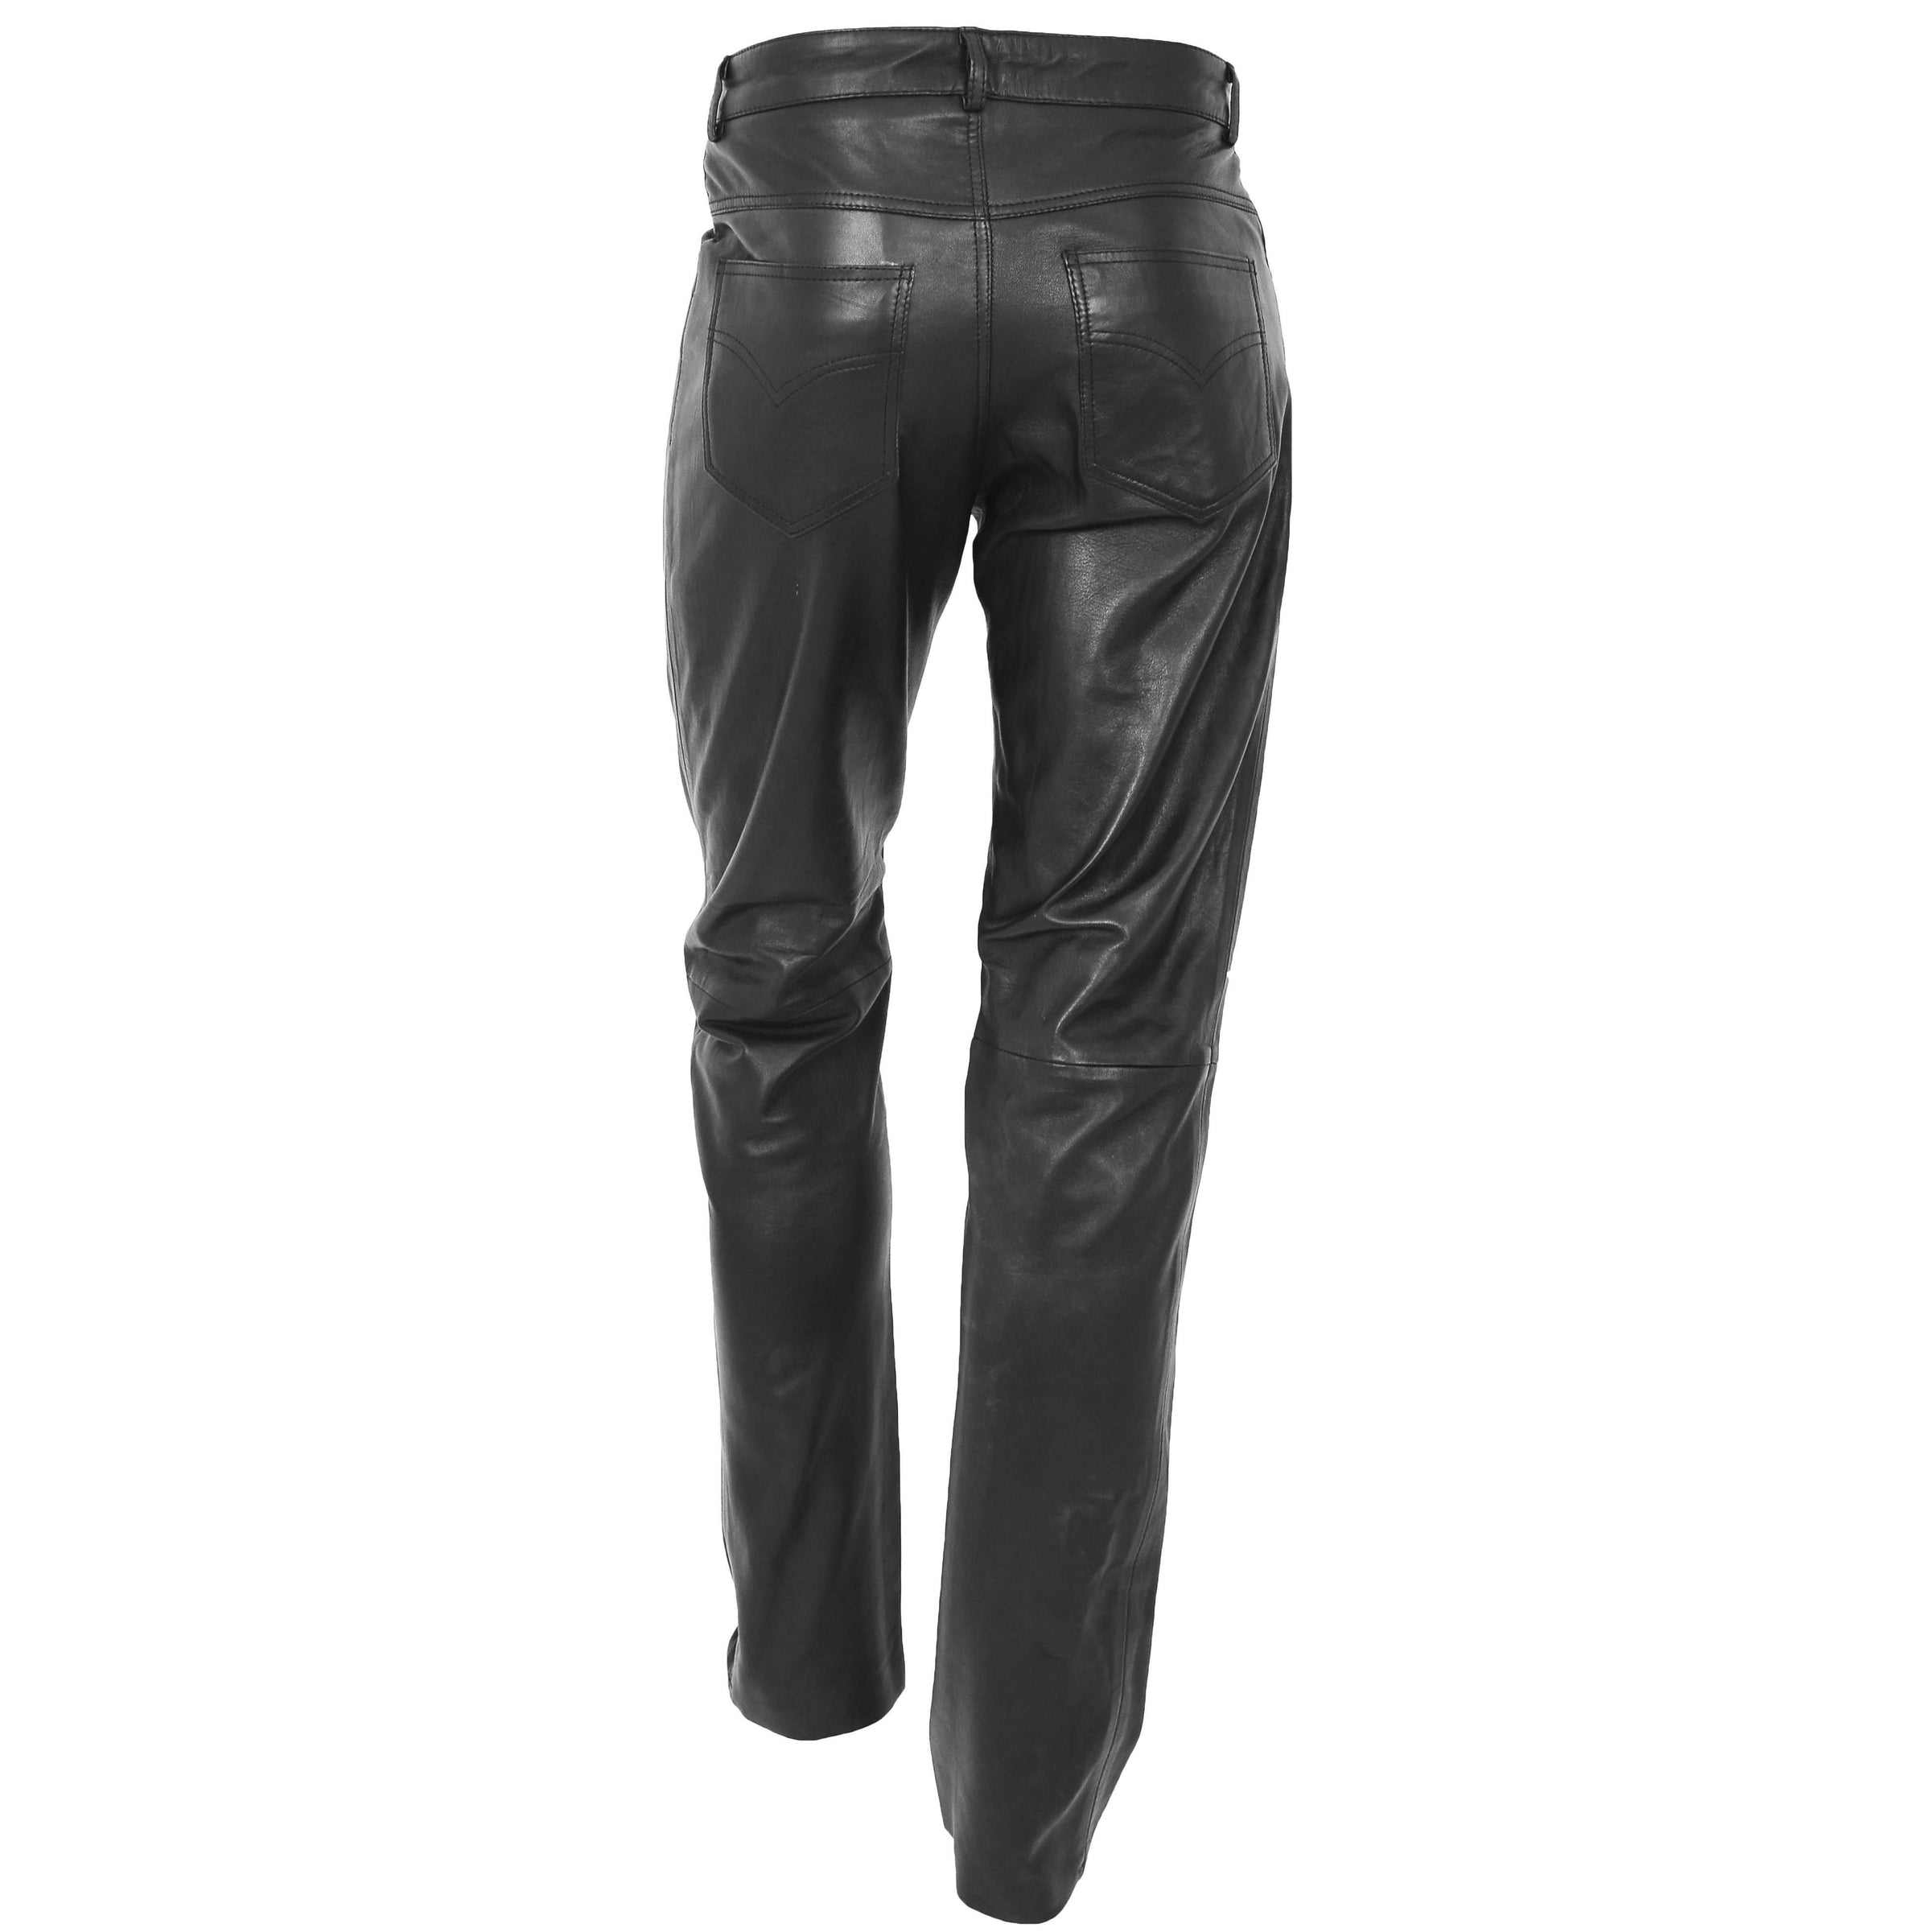 Stepping Up Your Fashion Game: Men's Lace Up Leather Pants | Lace up leather  pants, Mens leather pants, Fashion